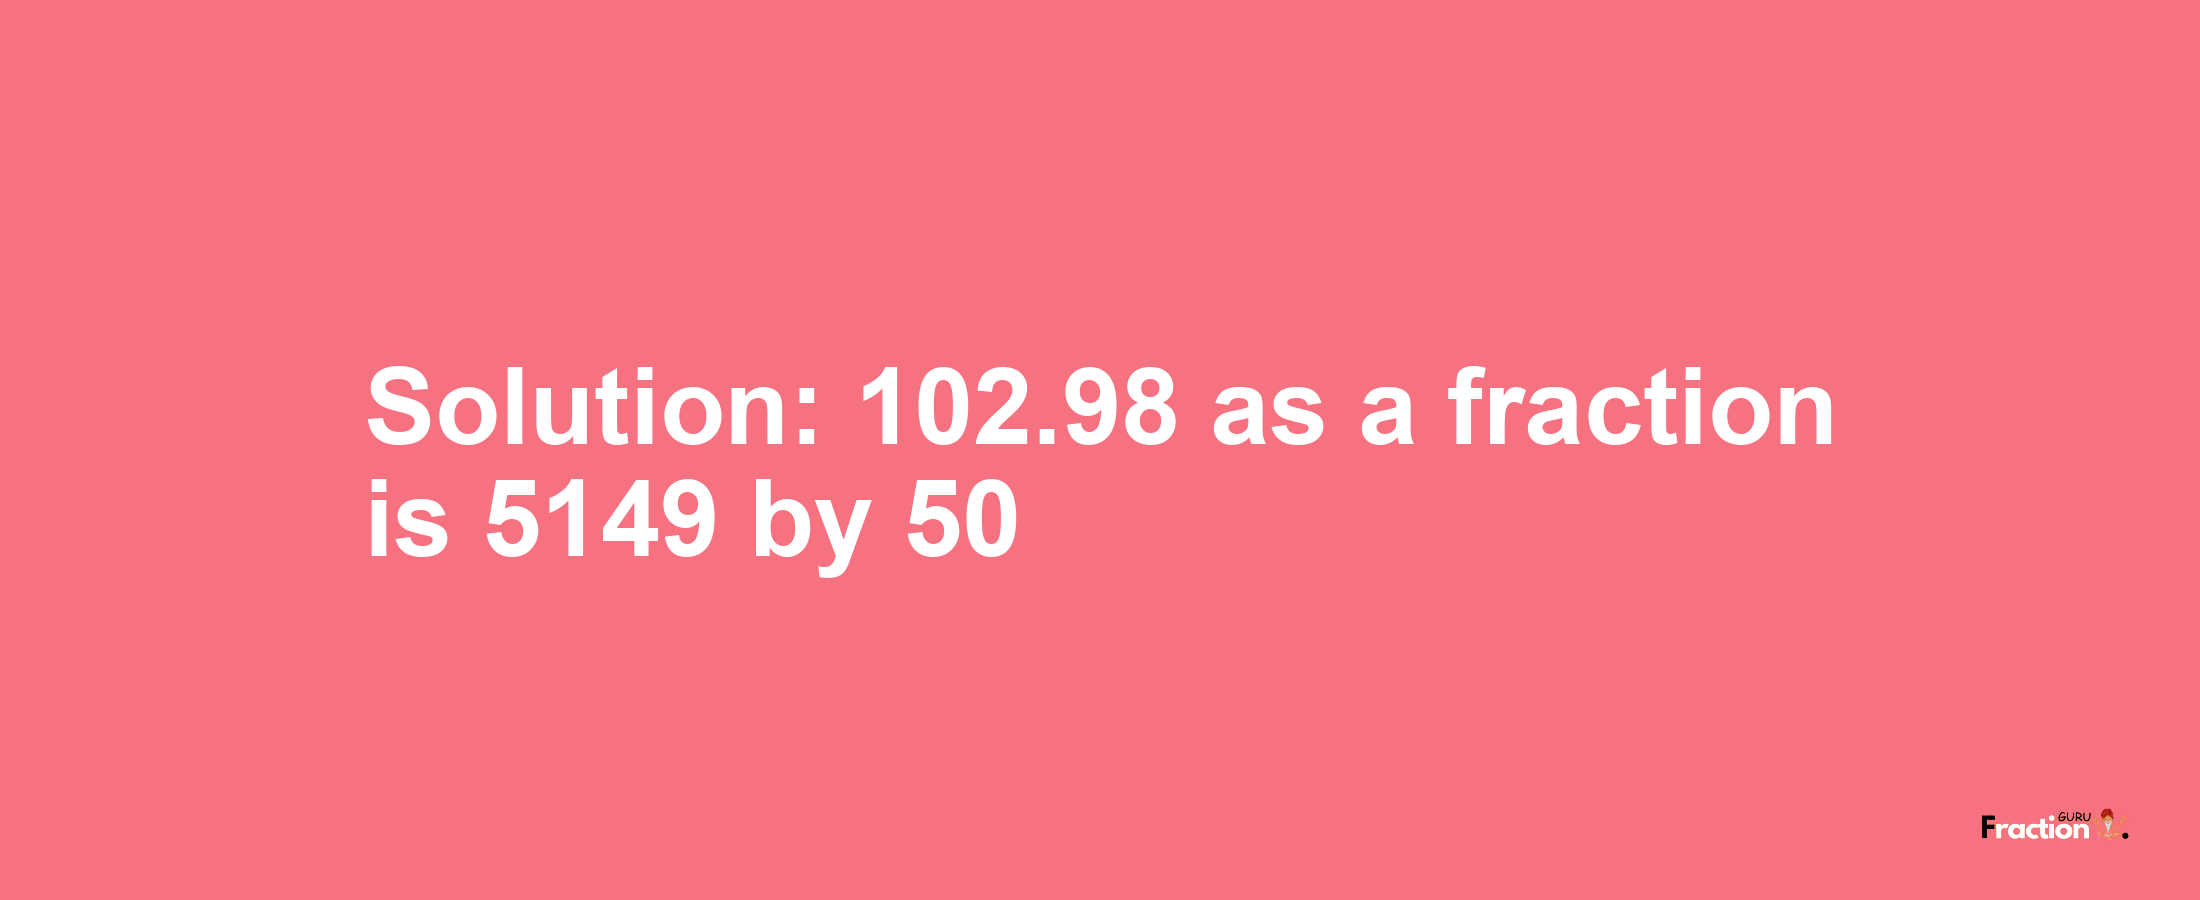 Solution:102.98 as a fraction is 5149/50